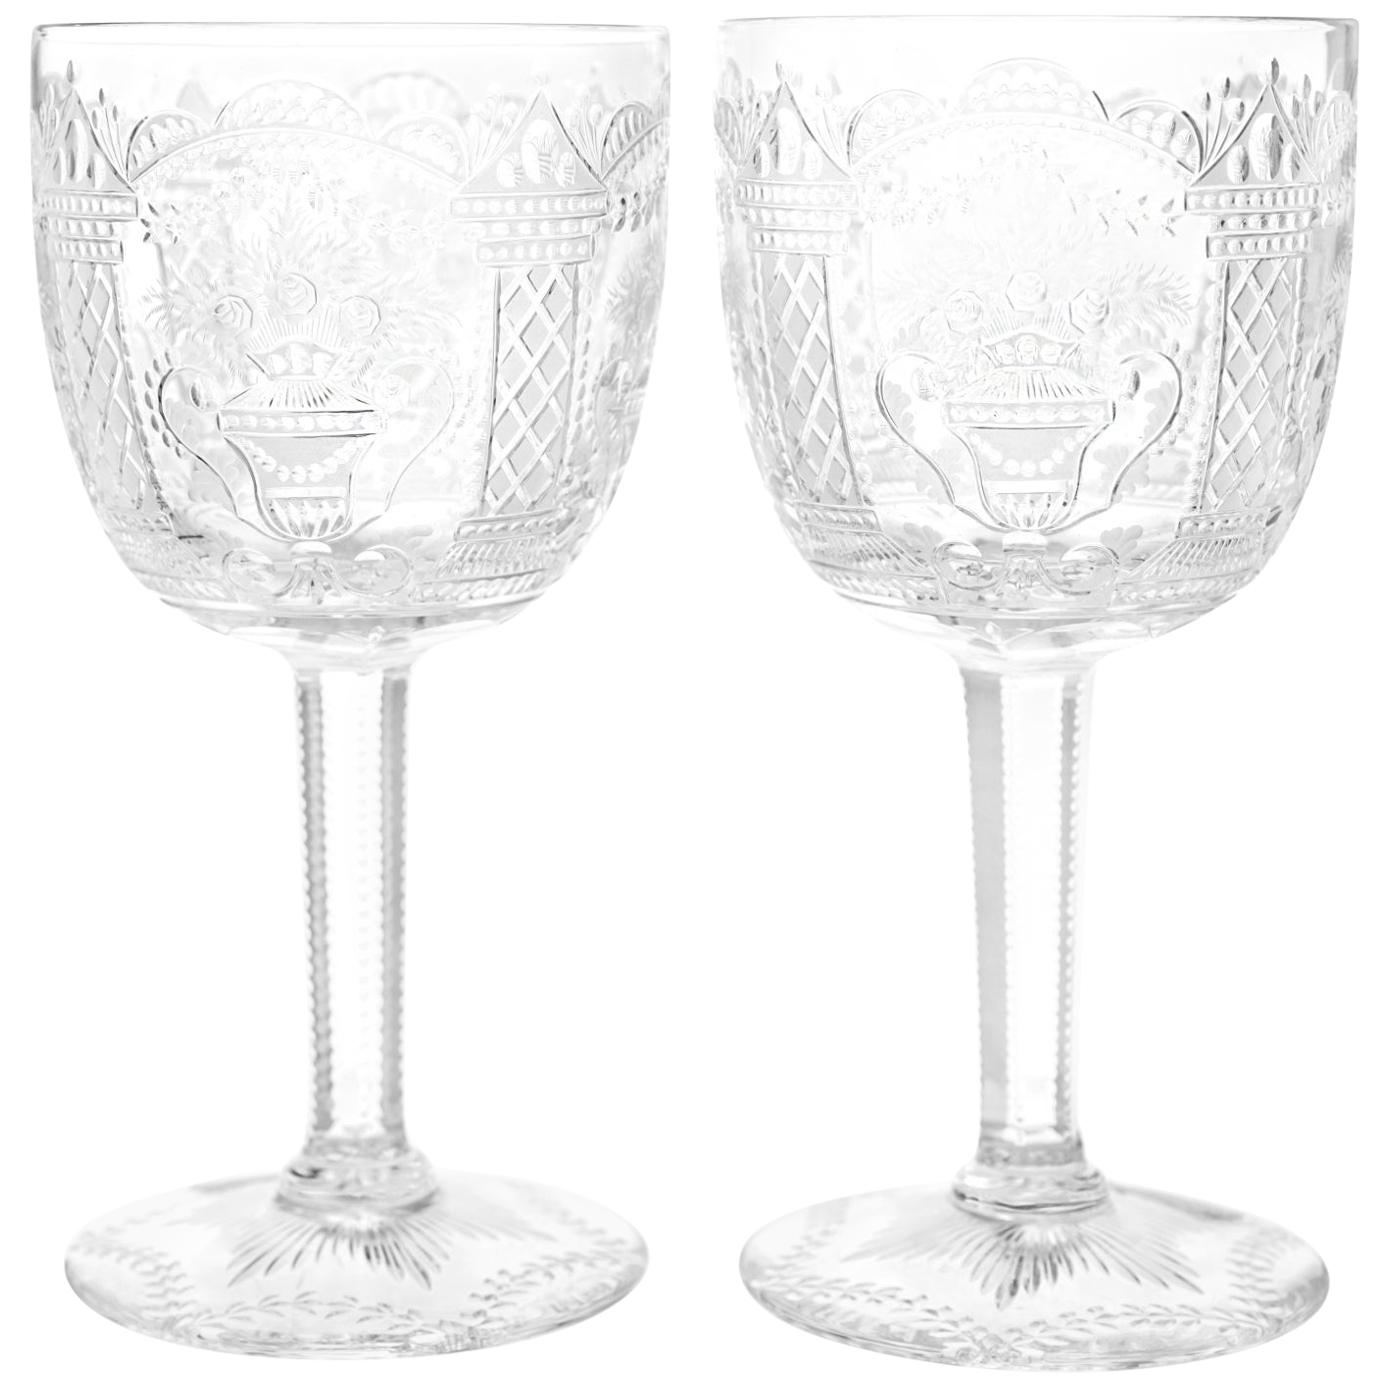 One-of-a-Kind Set of 12 Cut Crystal Goblets by Erwin Krause for Tharaud Designs For Sale